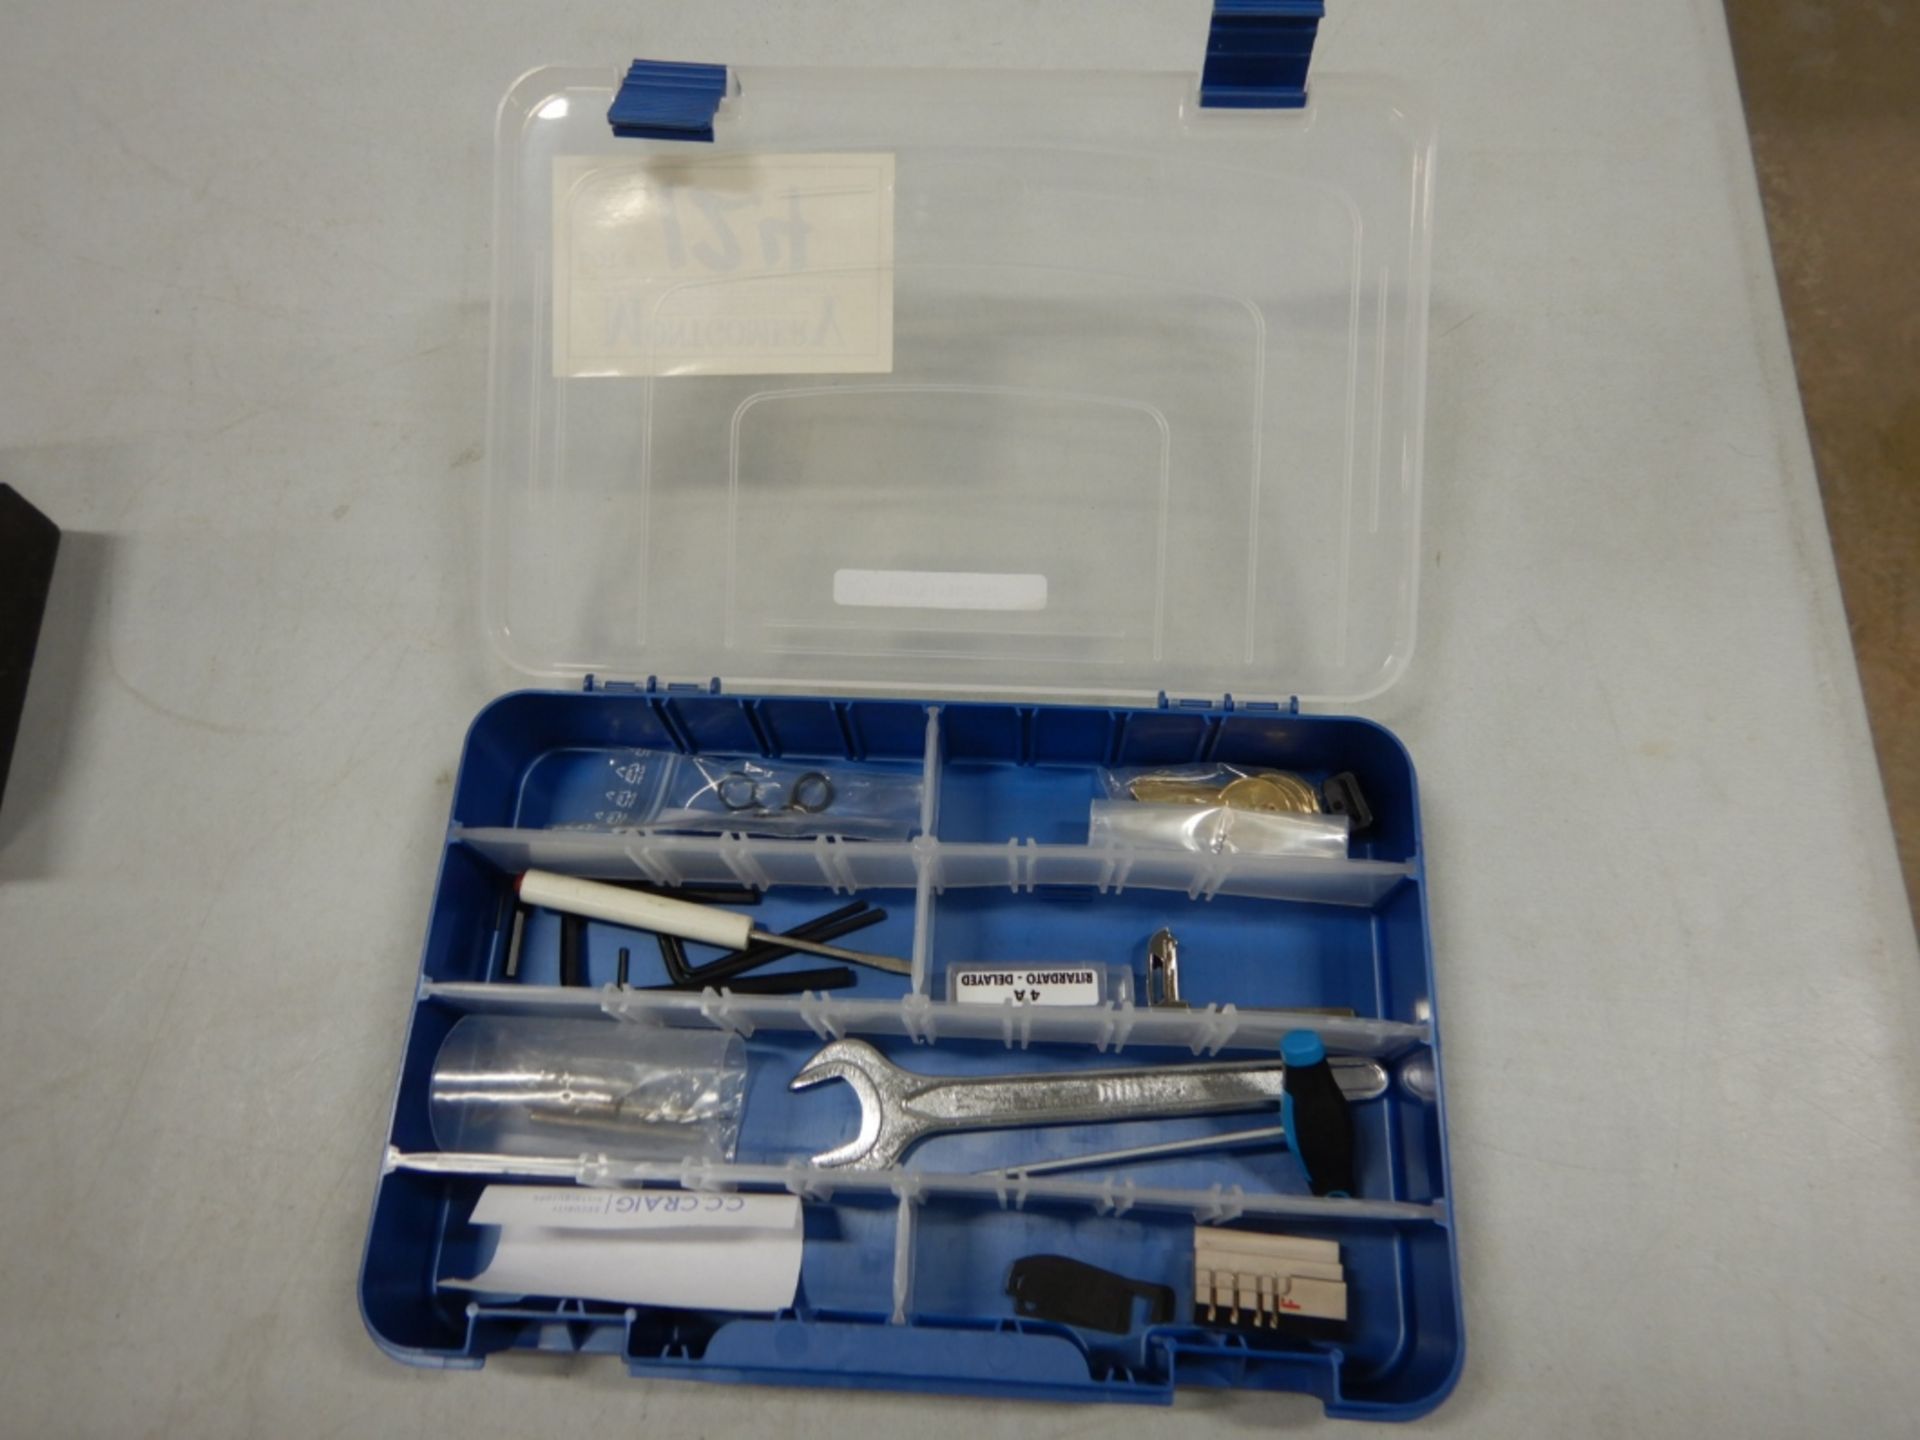 PICKMASTERS KIT, CYLINDER THREADING TOOL, "DO NOT COPY" STAMP TOOL, MATRICOLA 1907011980502 KIT - Image 3 of 7